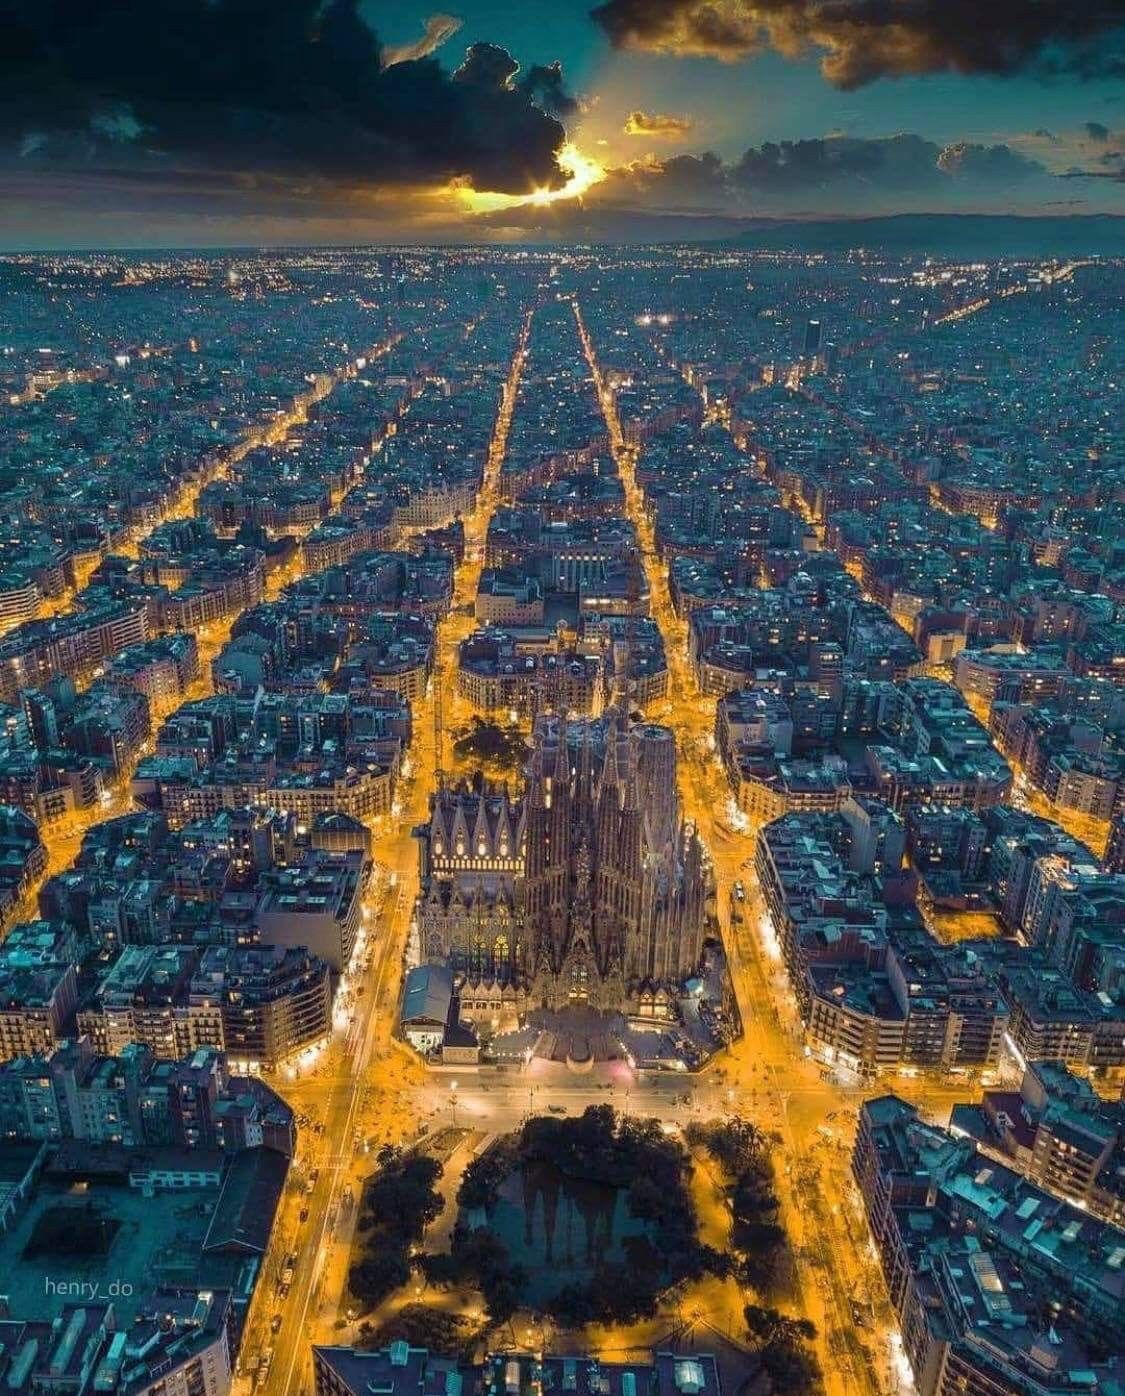 barcelona day and night - henry do